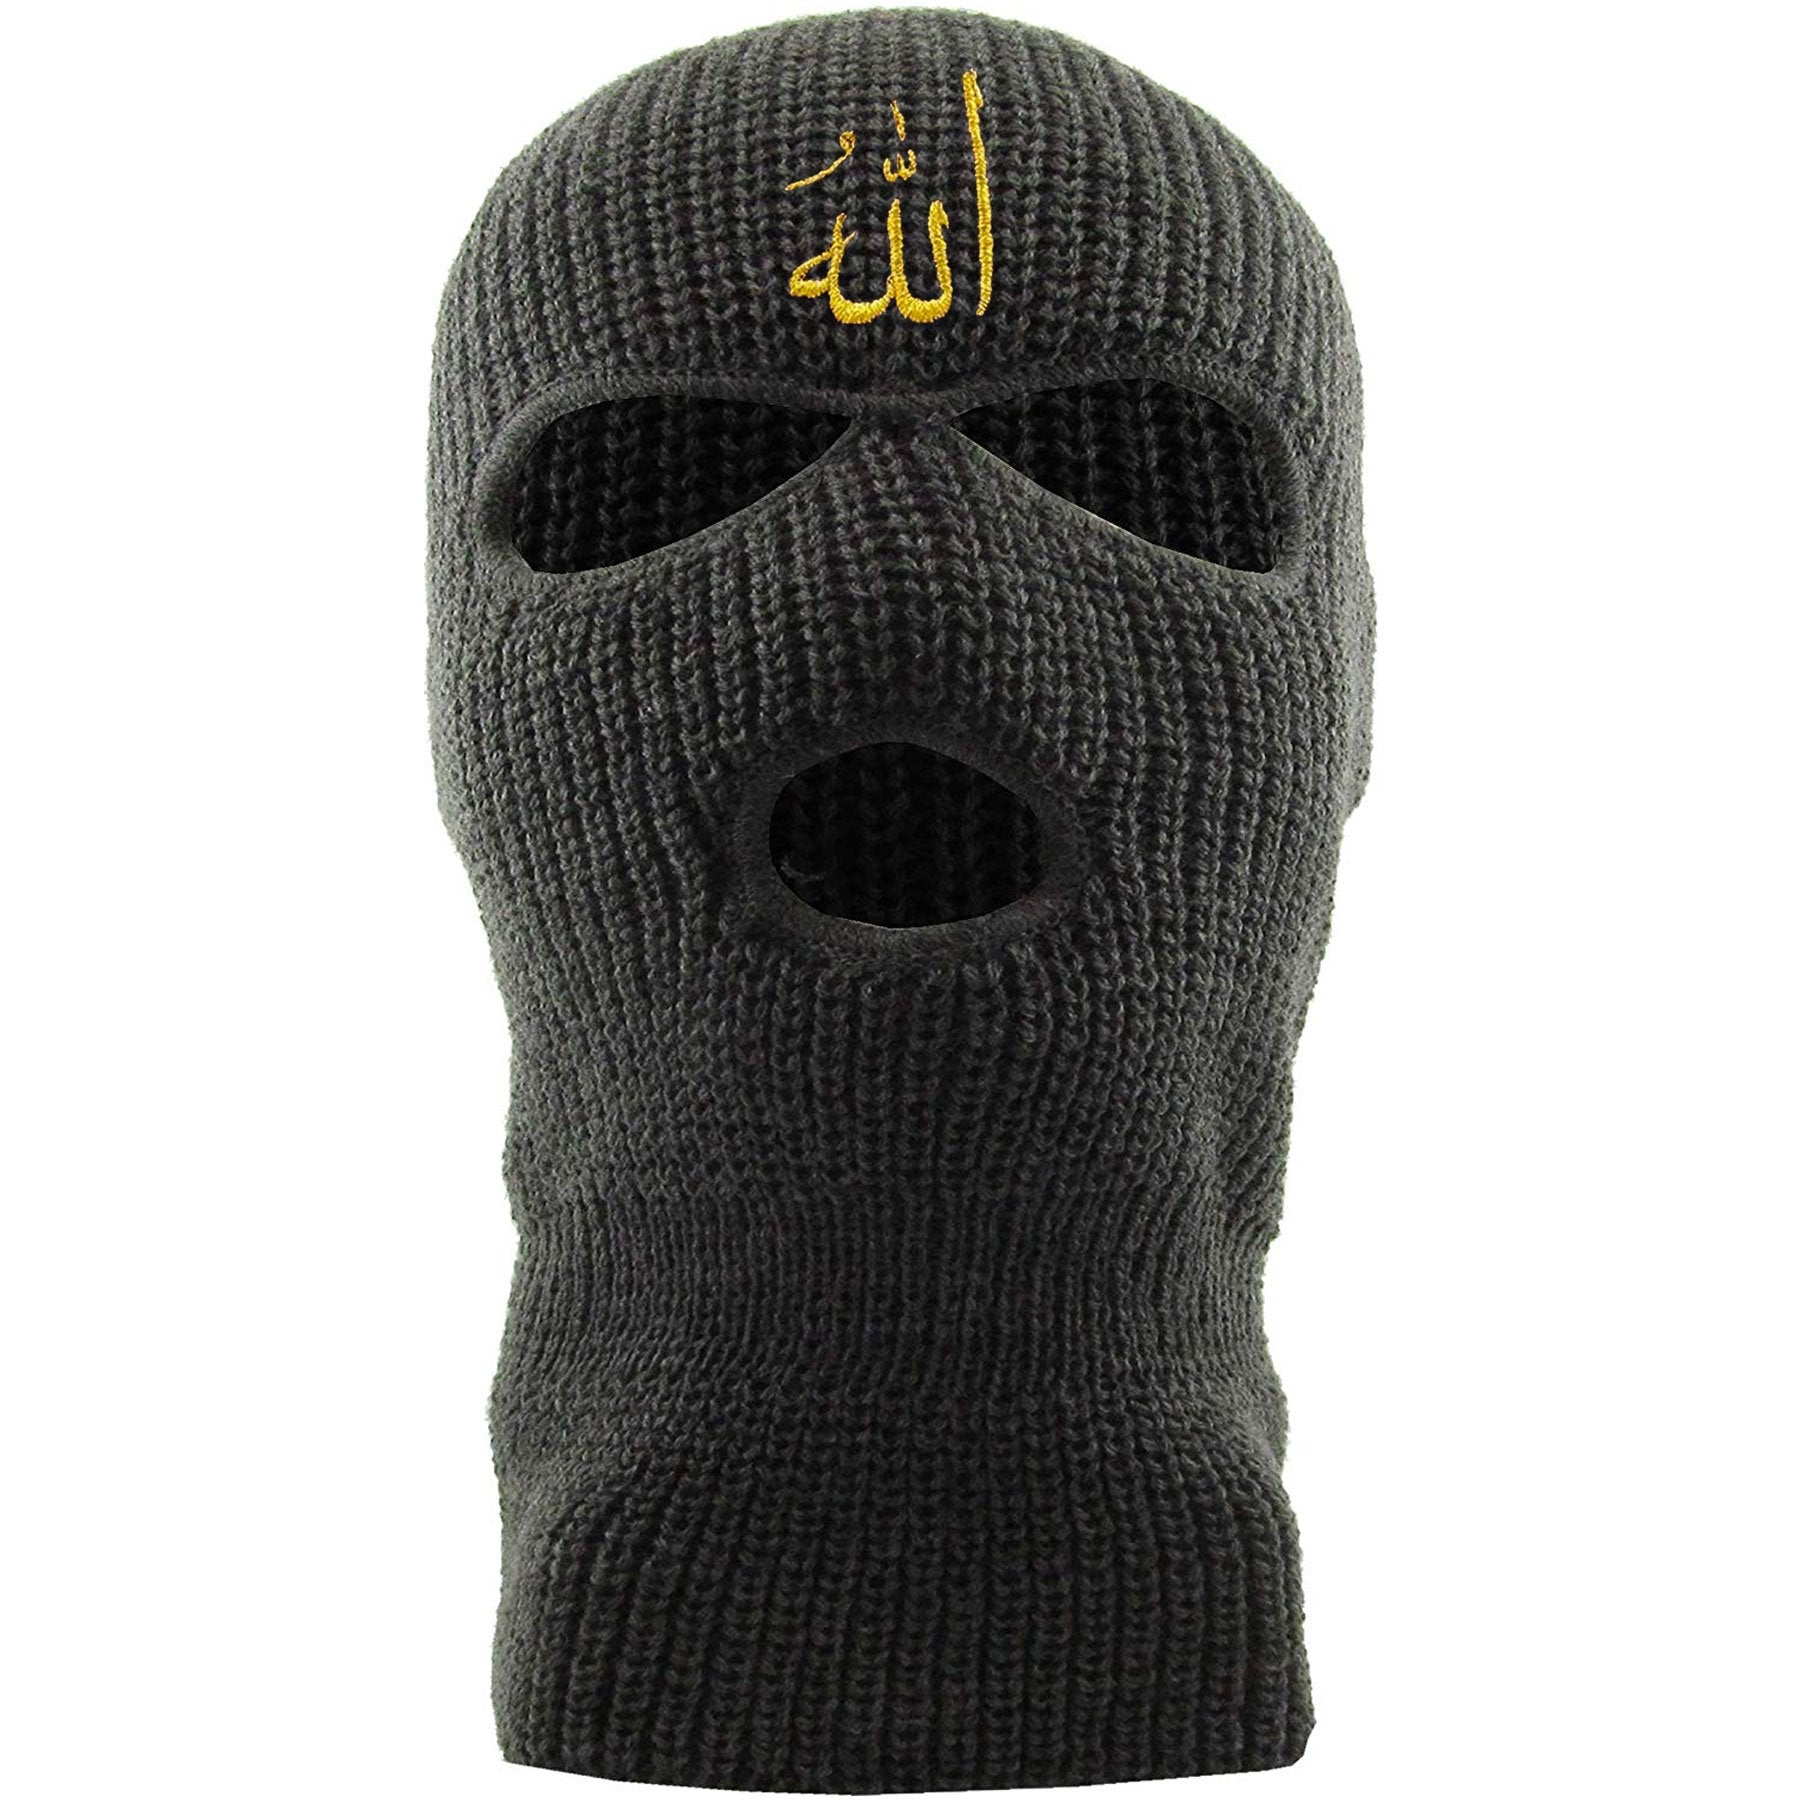 Embroidered on the front of the dark gray Allah ski mask is the arabic writing for the word allah